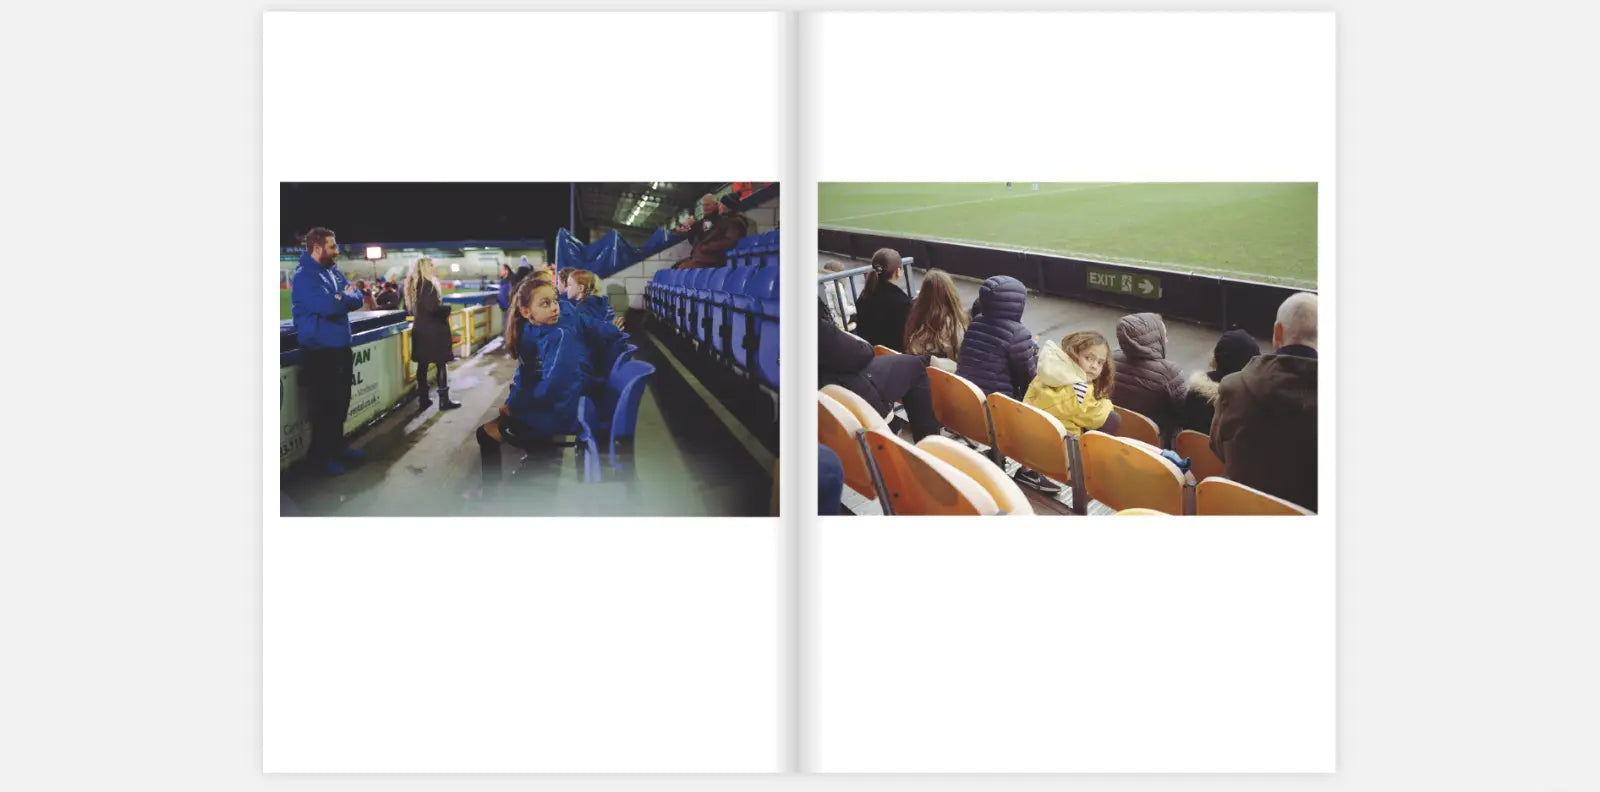 Two-page spread from the zine "The Women's Game" by Claire Wray. The left page shows a nighttime scene at a football stadium with blue seats. A young girl in a blue jacket sits on the edge of a row of seats, looking back at the camera, while a man in a blue jacket and other spectators stand nearby. The right page shows spectators sitting in orange and yellow seats during a daytime match. A young girl in a yellow coat looks back at the camera, with the football field and other spectators in the background.